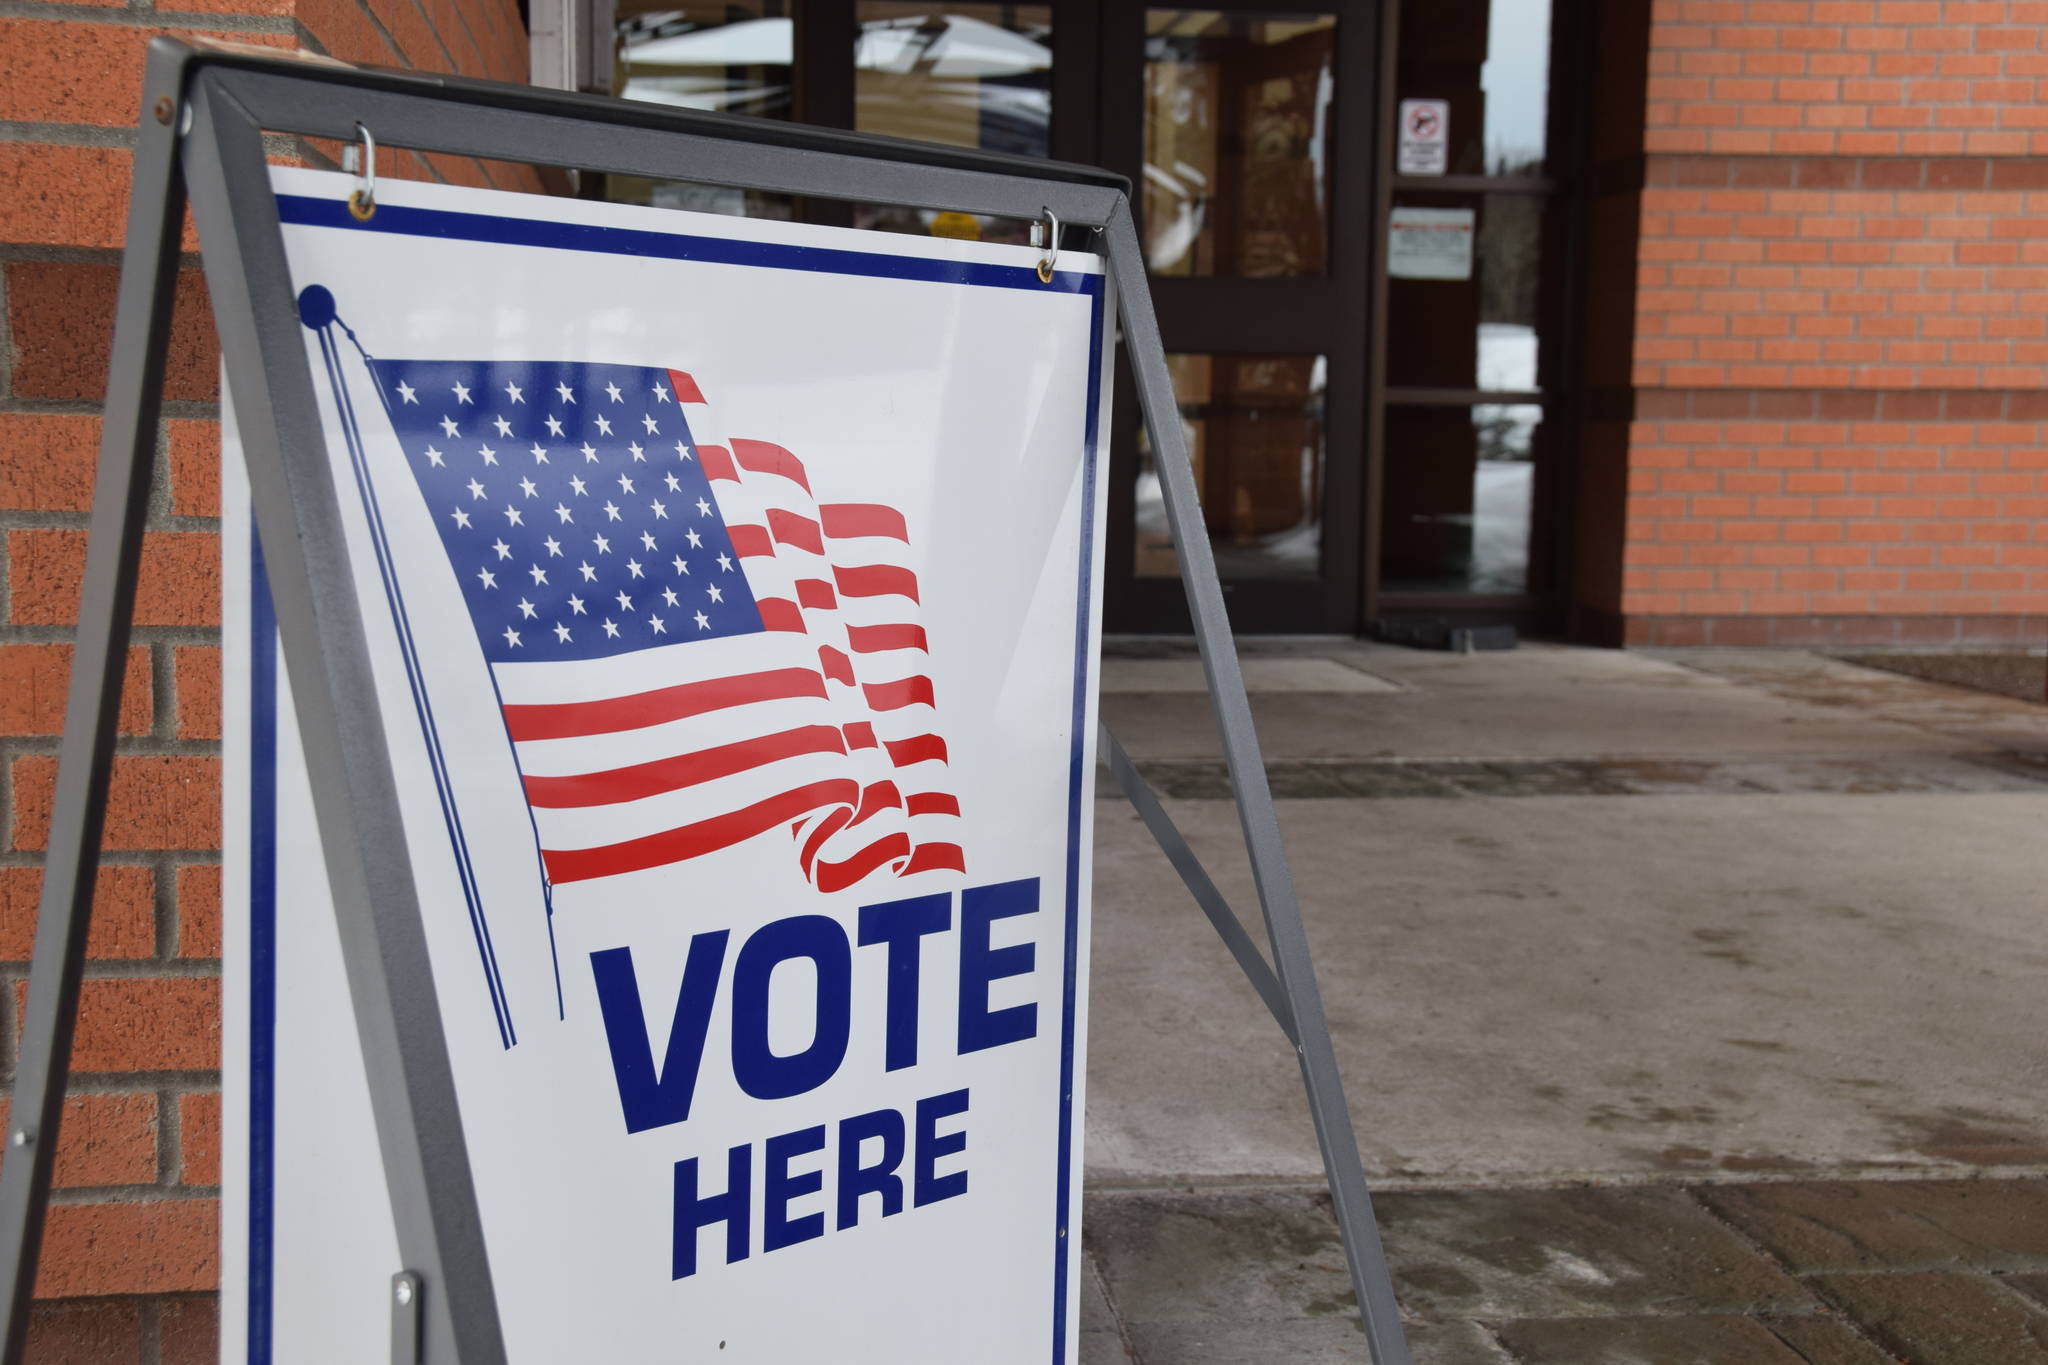 A sign directs voters at Soldotna City Hall on March 5, 2019. (Photo by Brian Mazurek/Peninsula Clarion)